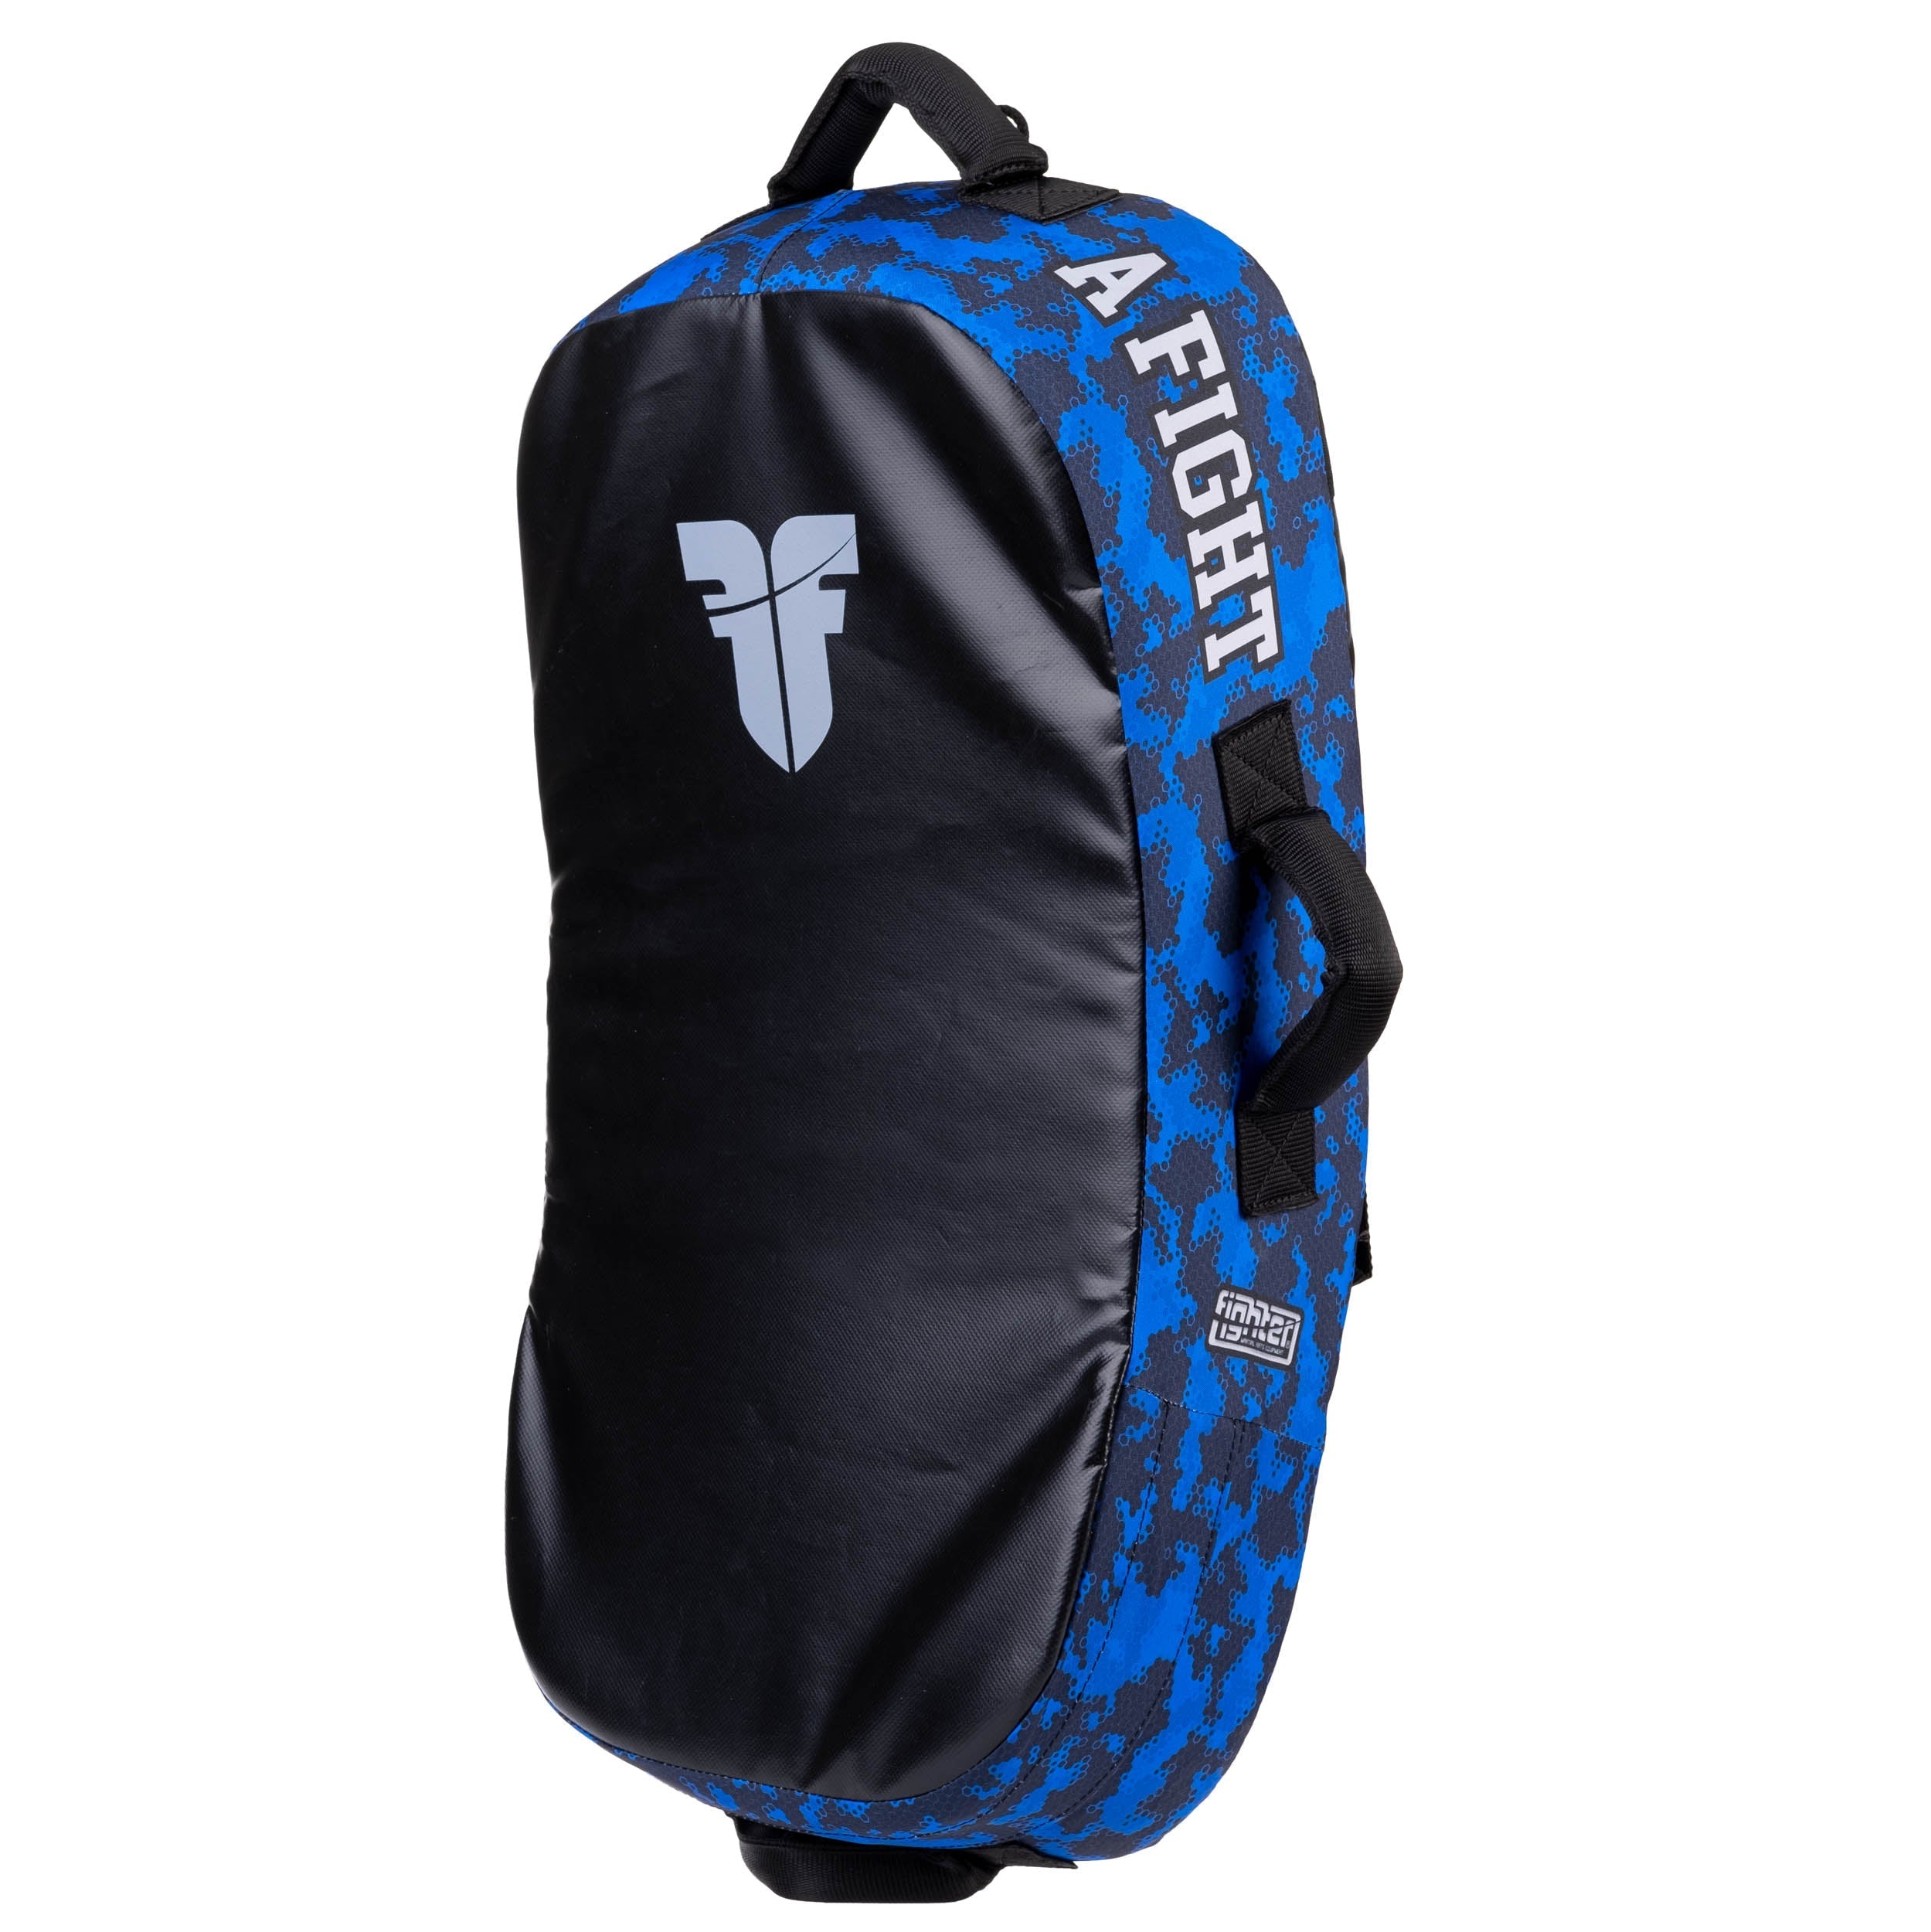 Fighter Kicking Shield - MULTI GRIP - Life is a Fight - Blue Camo, FKSH-28